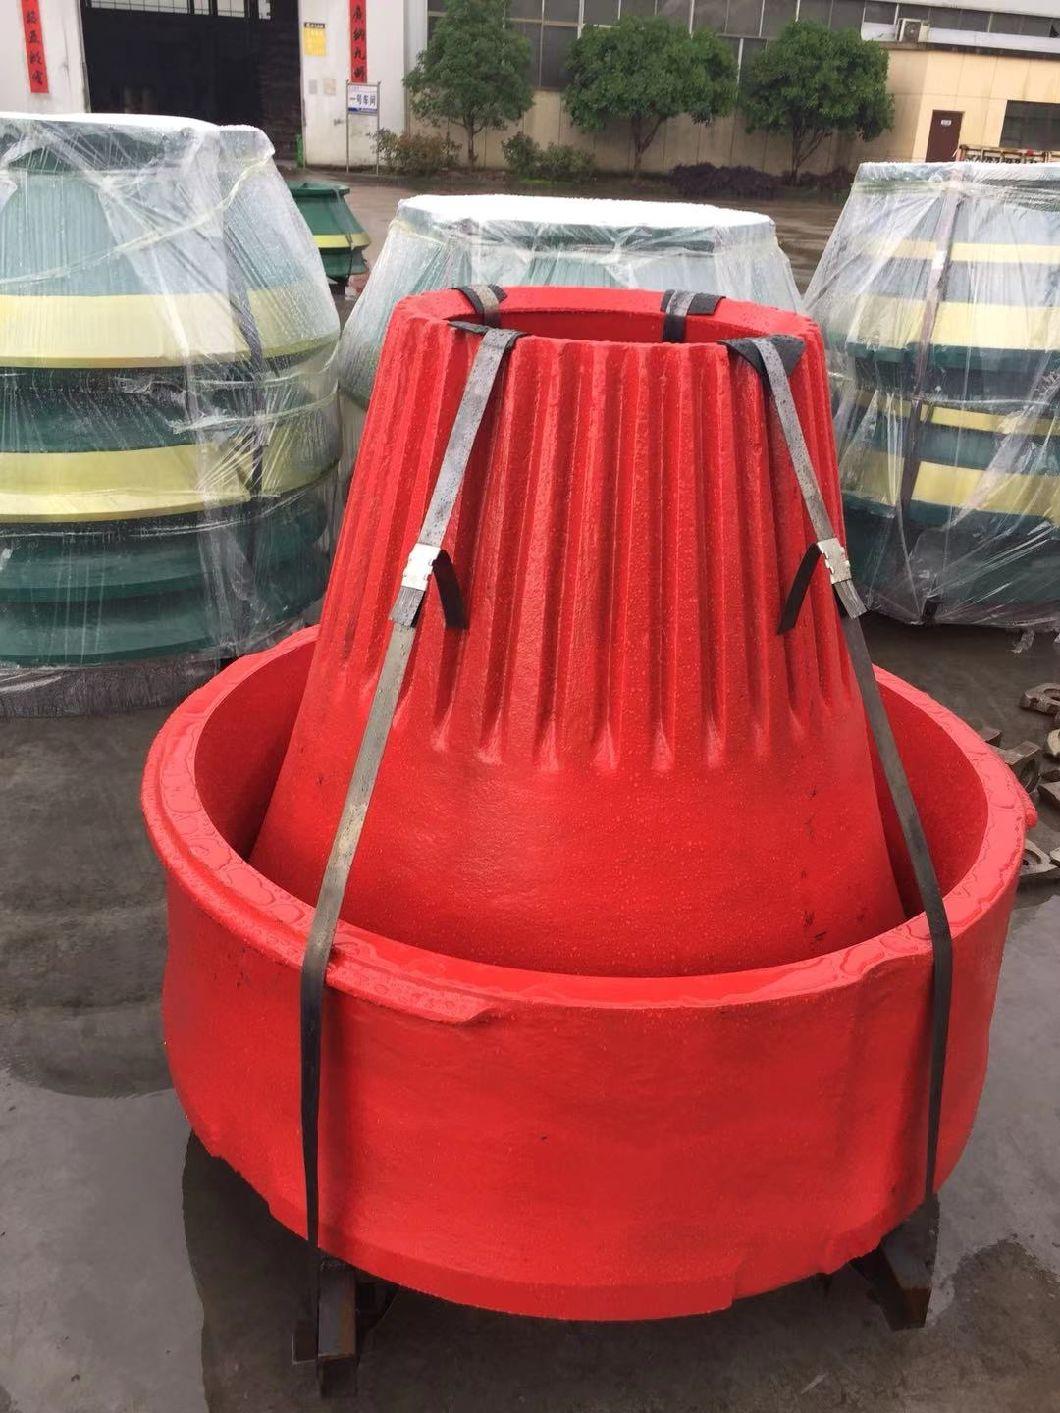 Impact Liner Blow Bar for Impact Crusher for Sale